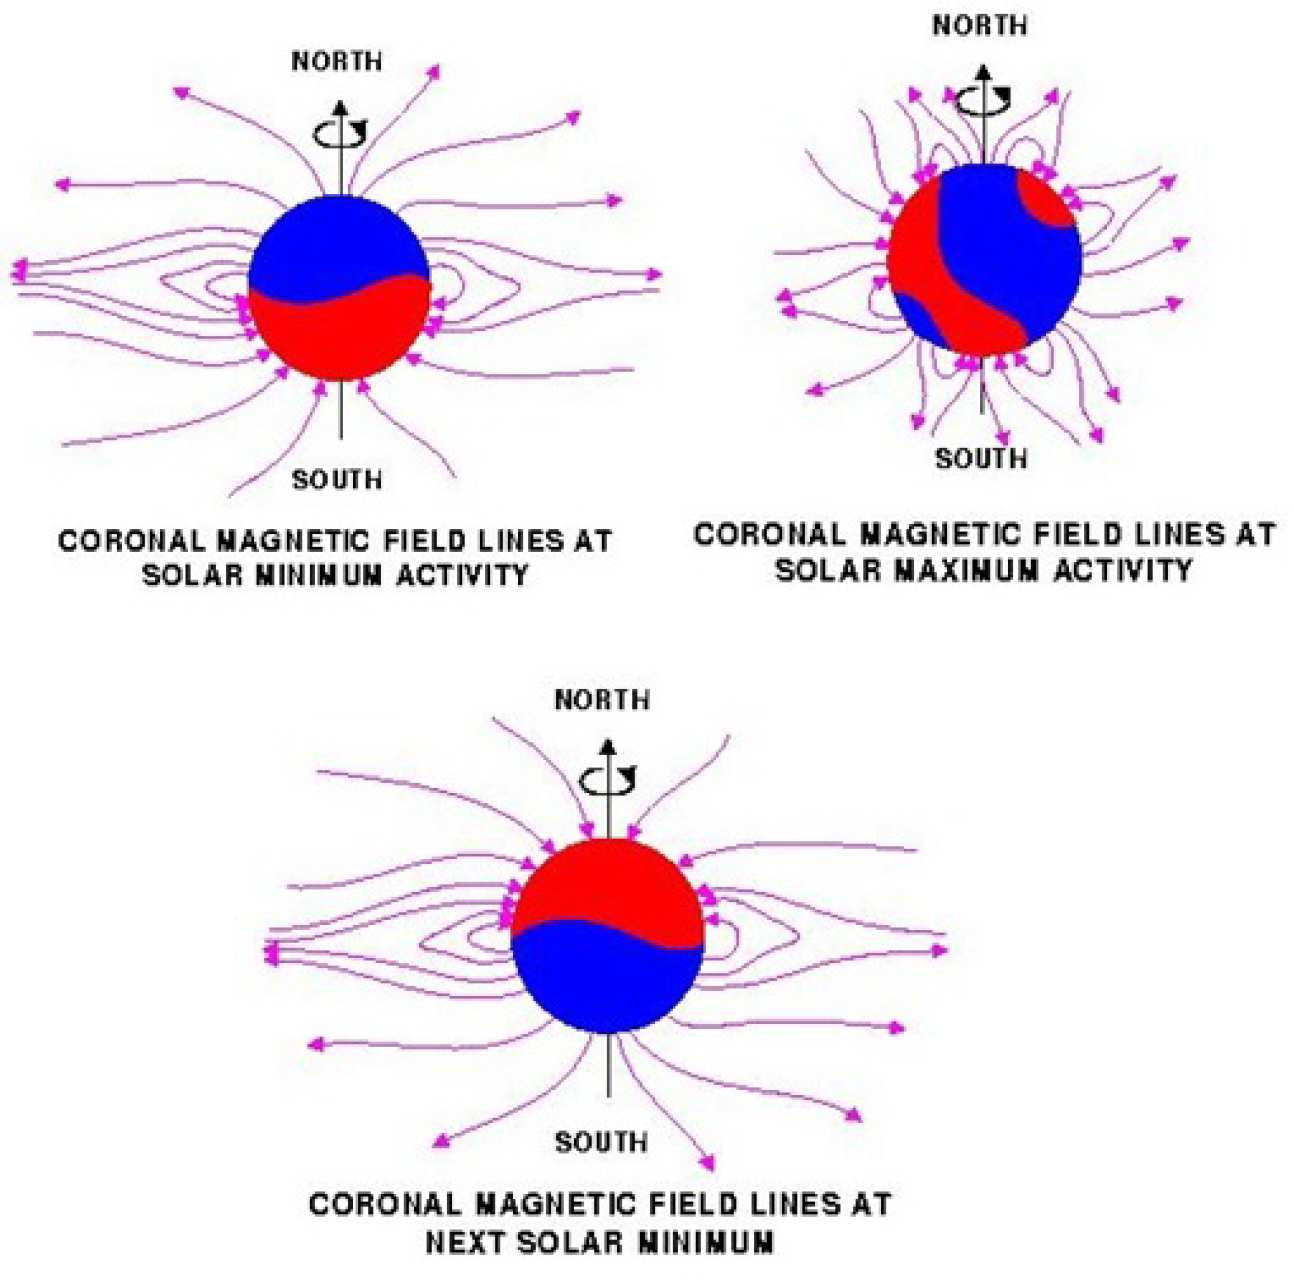 These diagrams show how magnetic field lines in the Sun's atmosphere, the corona, vary through the solar activity cycle: